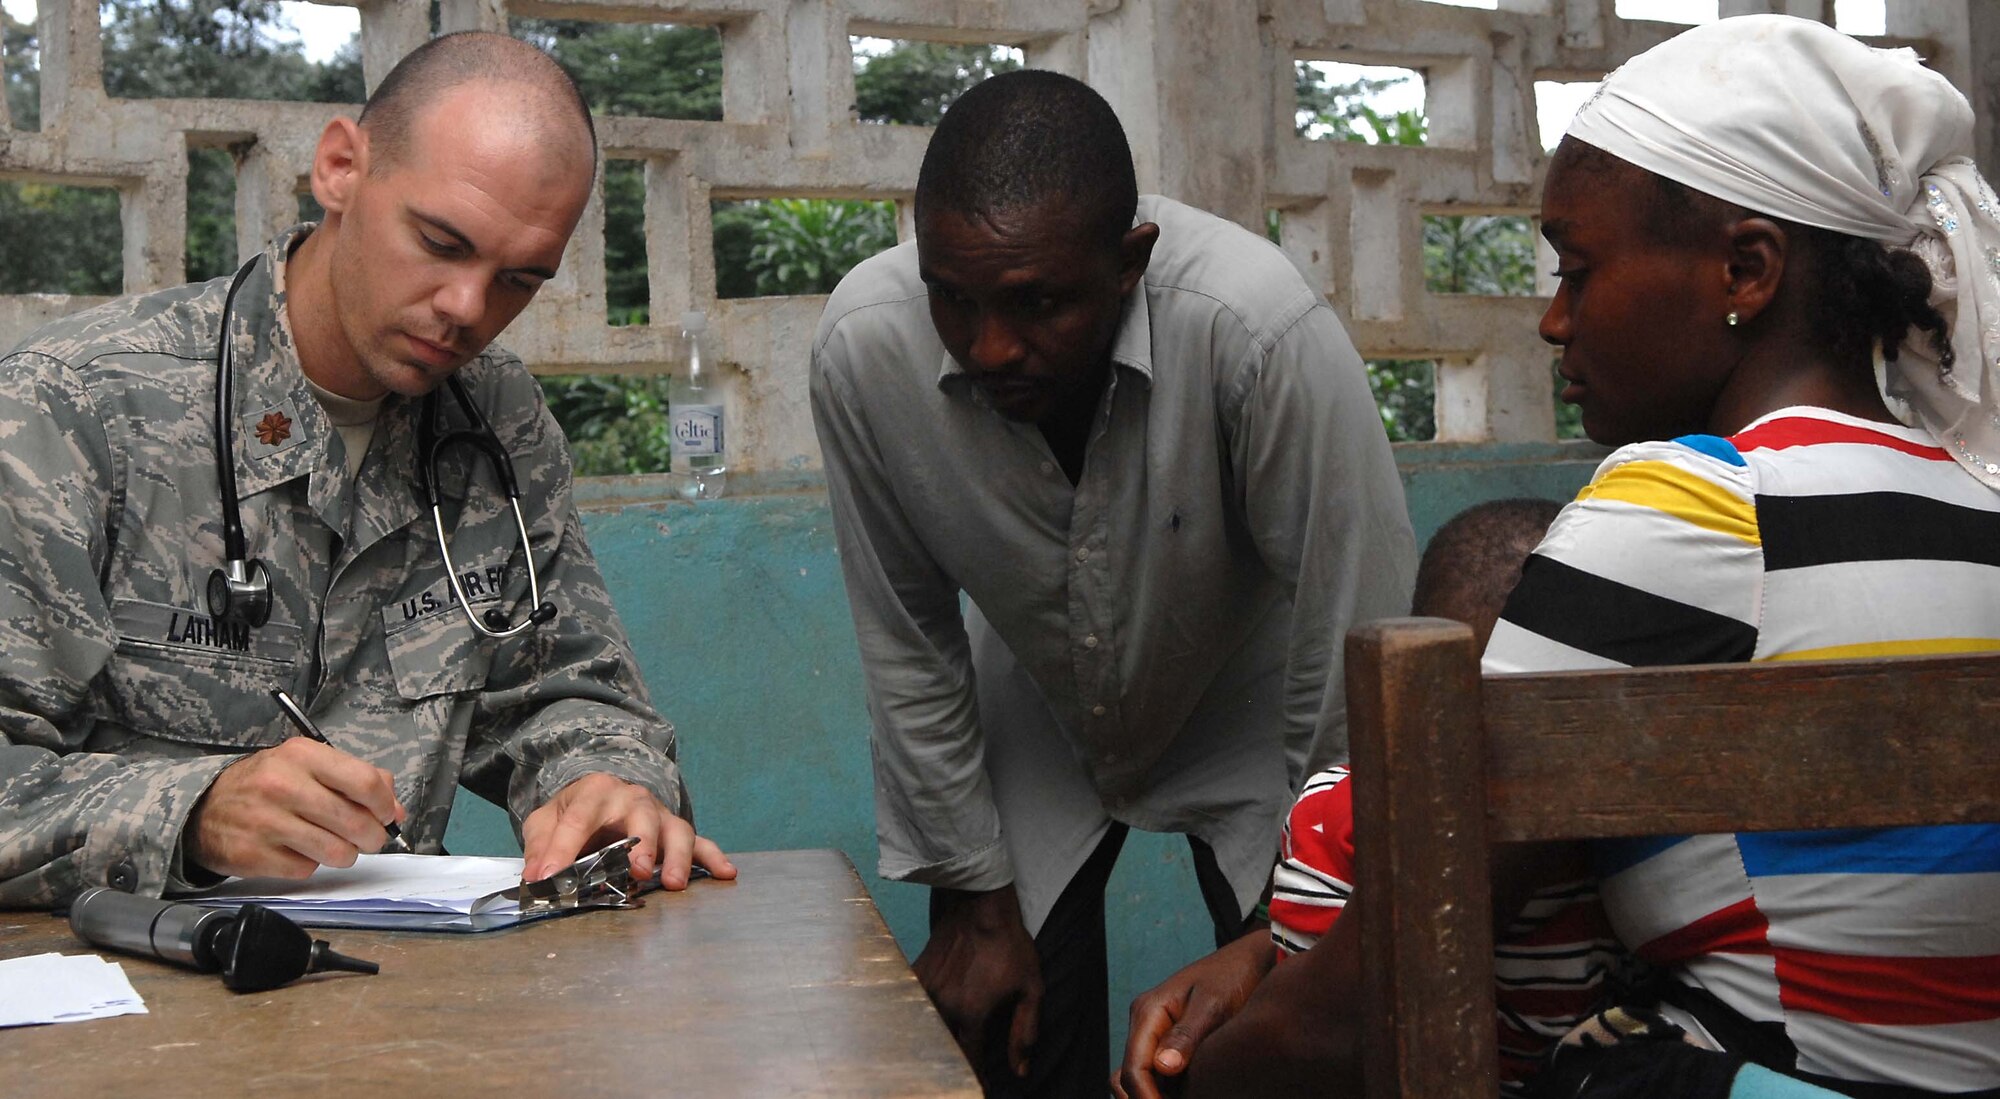 Maj. (Dr.) Joshua Latham prescribes medication to a patient during a medical outreach visit July 2, 2013, in Gondor Town, Liberia. Operation Onward Liberty advisers have been mentoring the Armed Forces of Liberia since 2010. OOL provides mentorship to the AFL to produce a capable, respected force able to protect Liberian interests in the West African region. . Latham is an AFL medical mentor deployed with Operation Onward Liberty. (U.S. Air Force photo/Master Sgt. Brian Bahret)